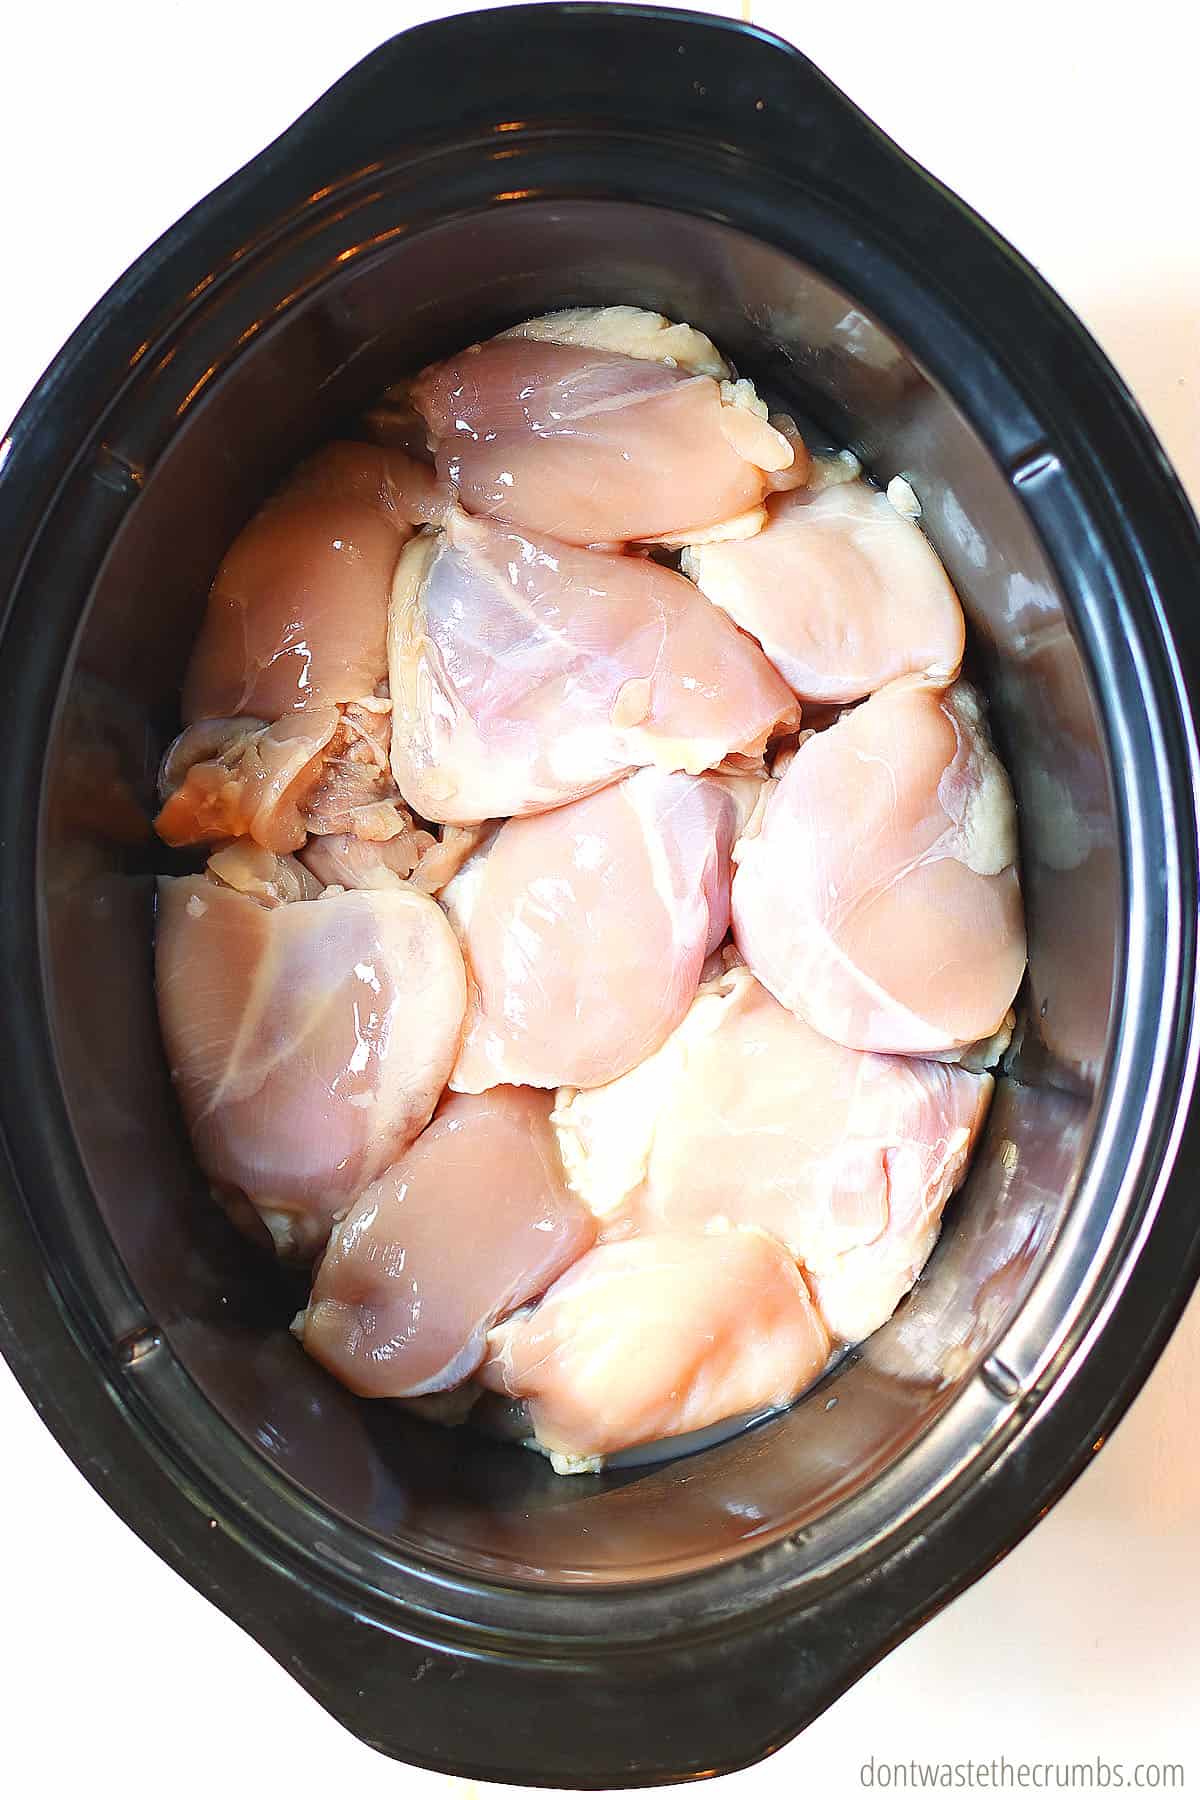 Raw chicken in the slow cooker ready to be made into shawarma.